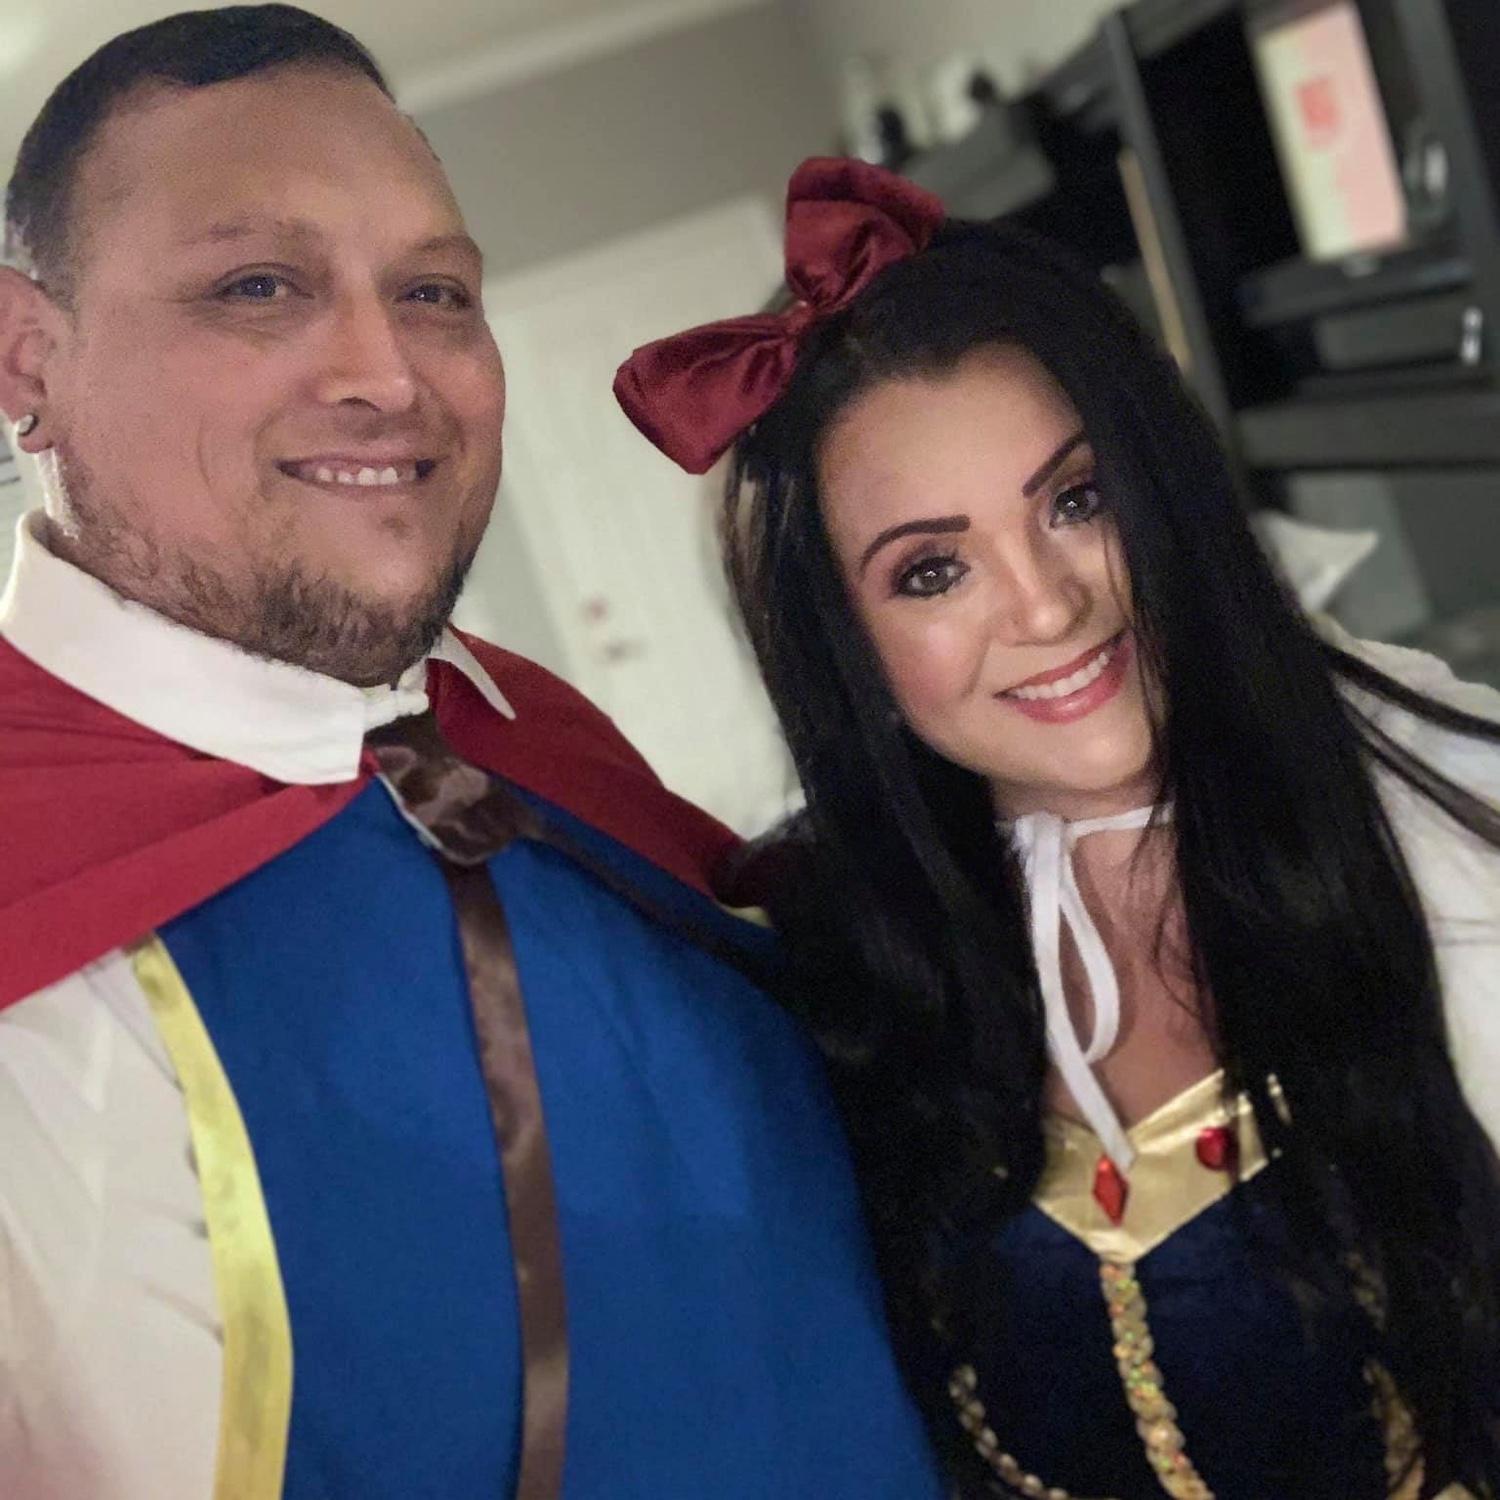 You’re never too old to dress up for Halloween! Snow White and her Prince